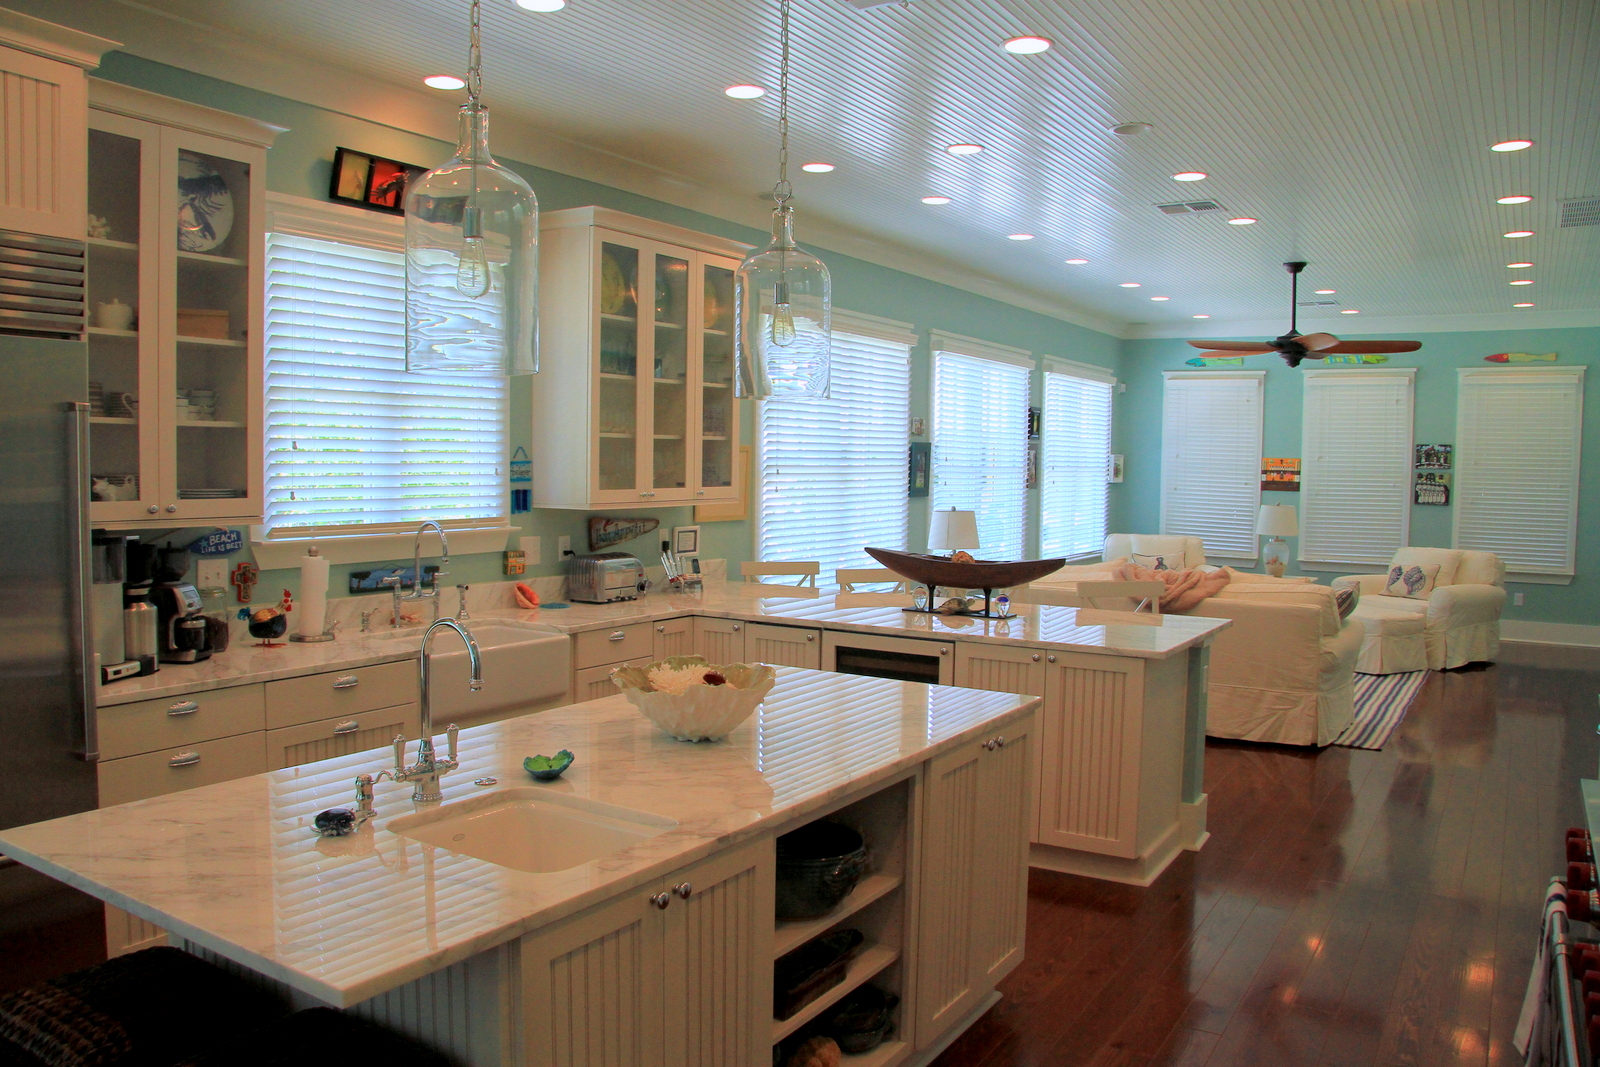 Beautiful Kitchens overlooking living areas is another key aspect to Thornhill Constructions Coastal Living theme.